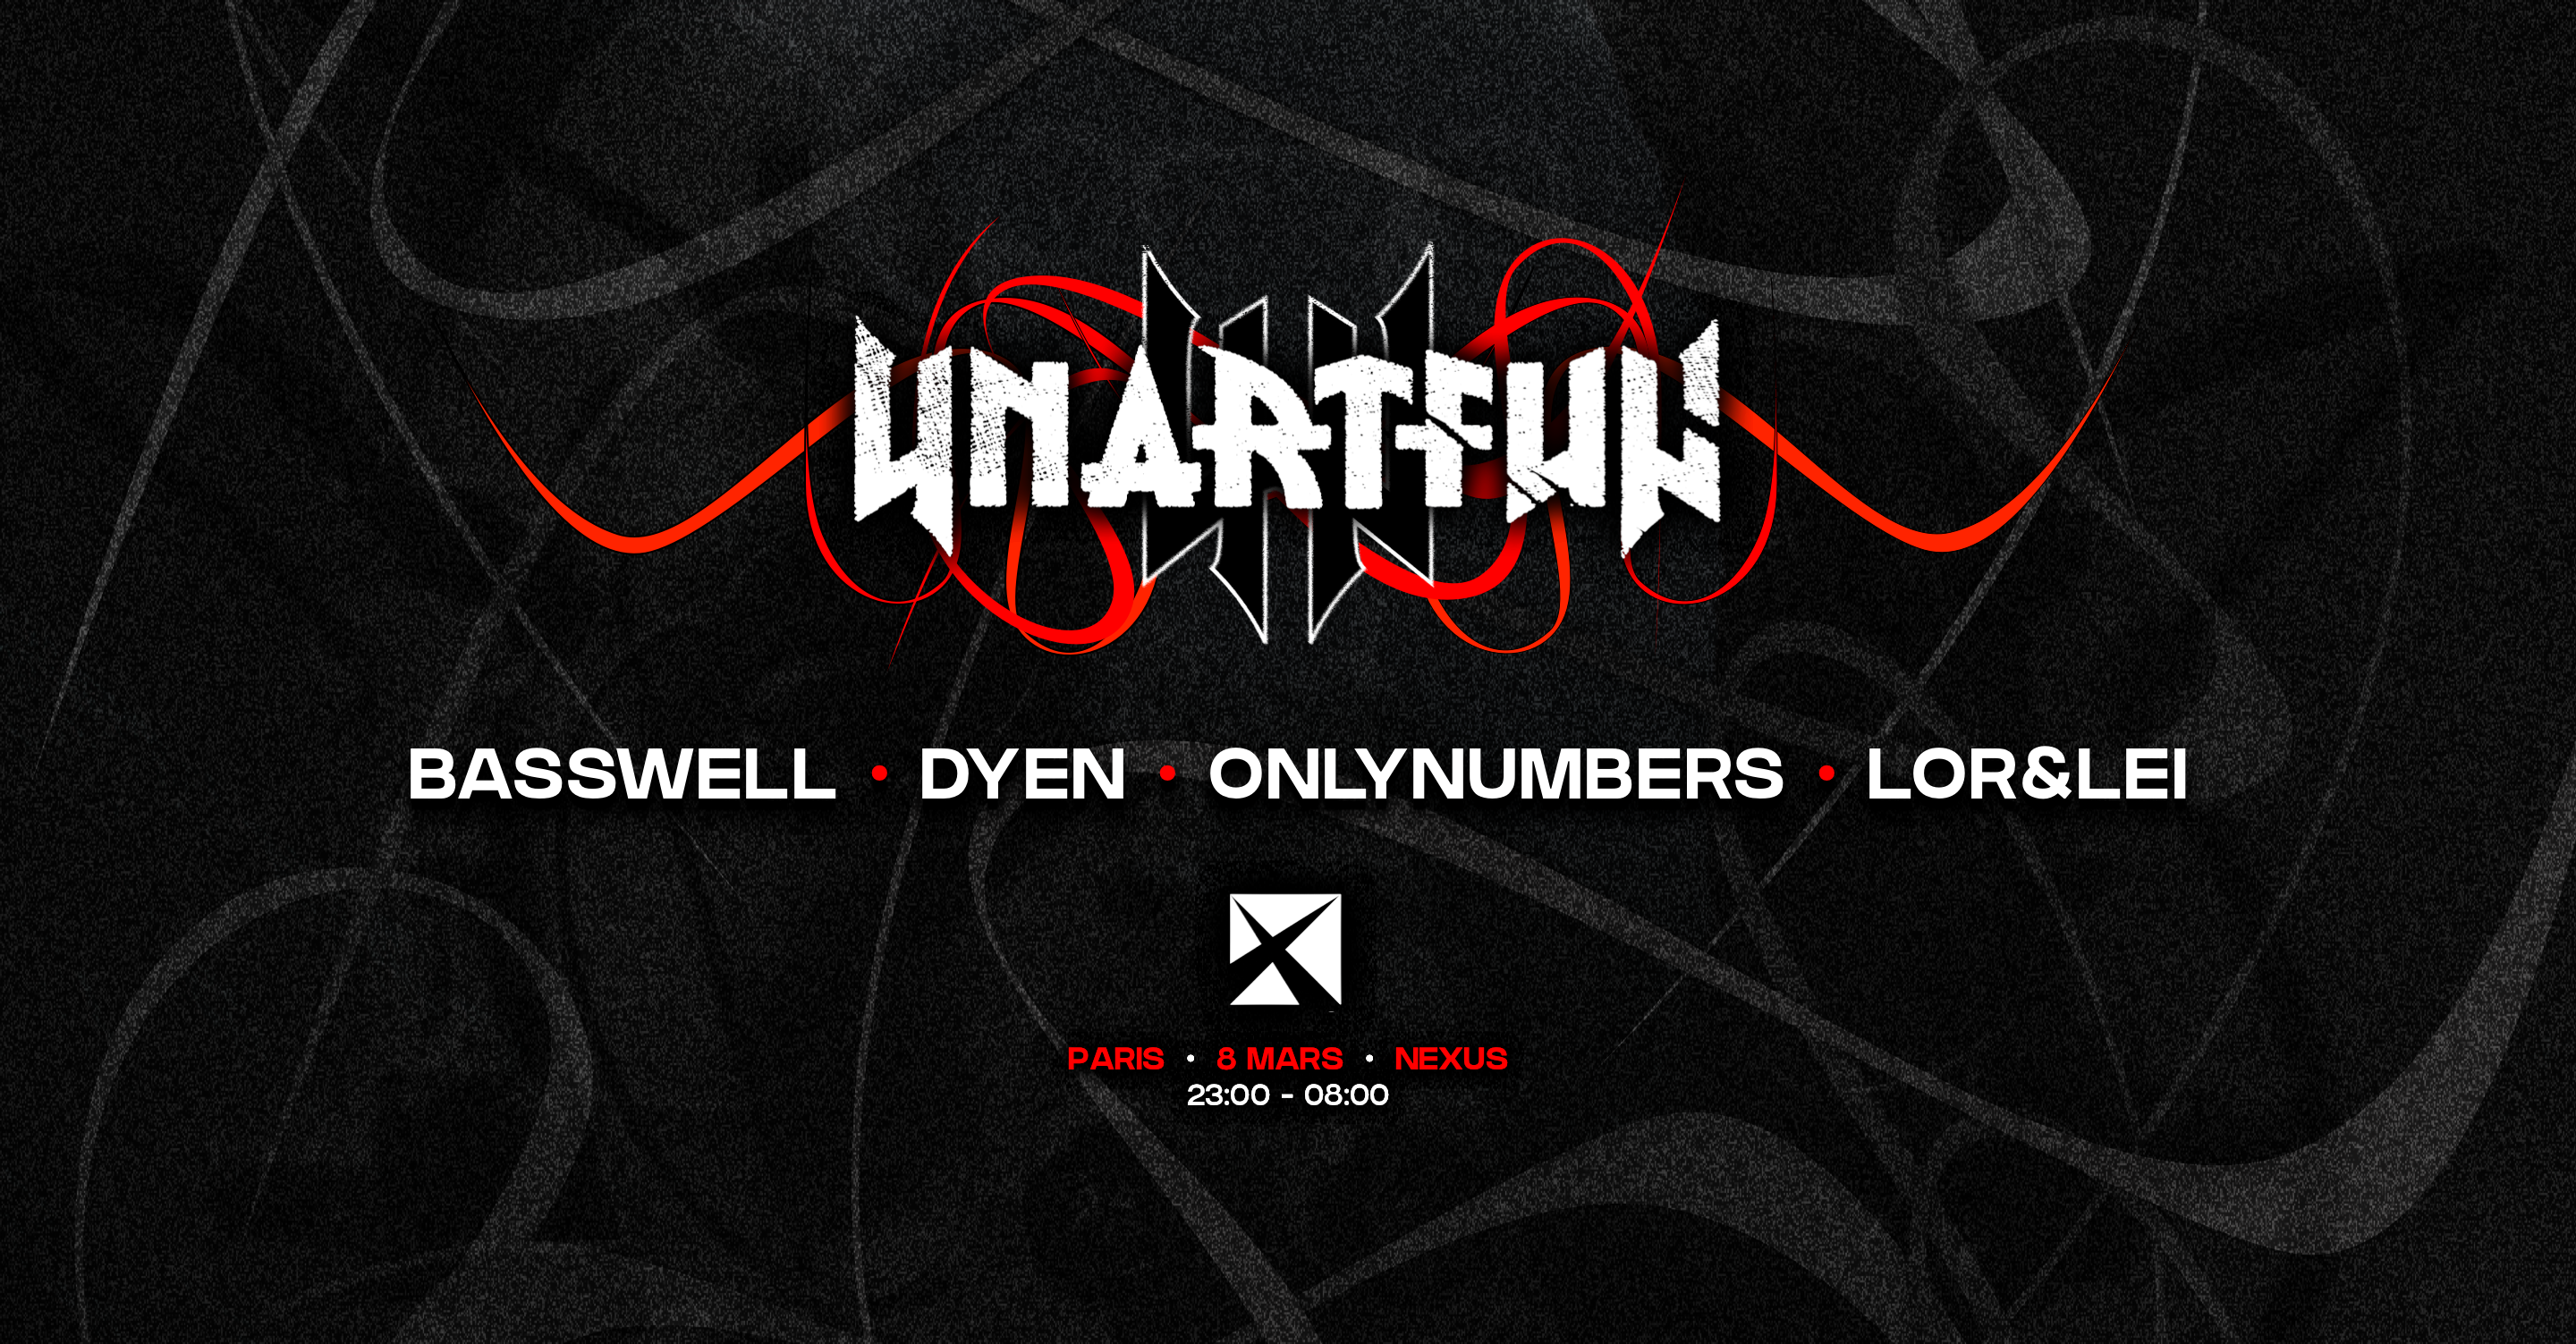 UNARTFUL: Basswell - DYEN - ONLYNUMBERS - LOR&LEI - フライヤー表